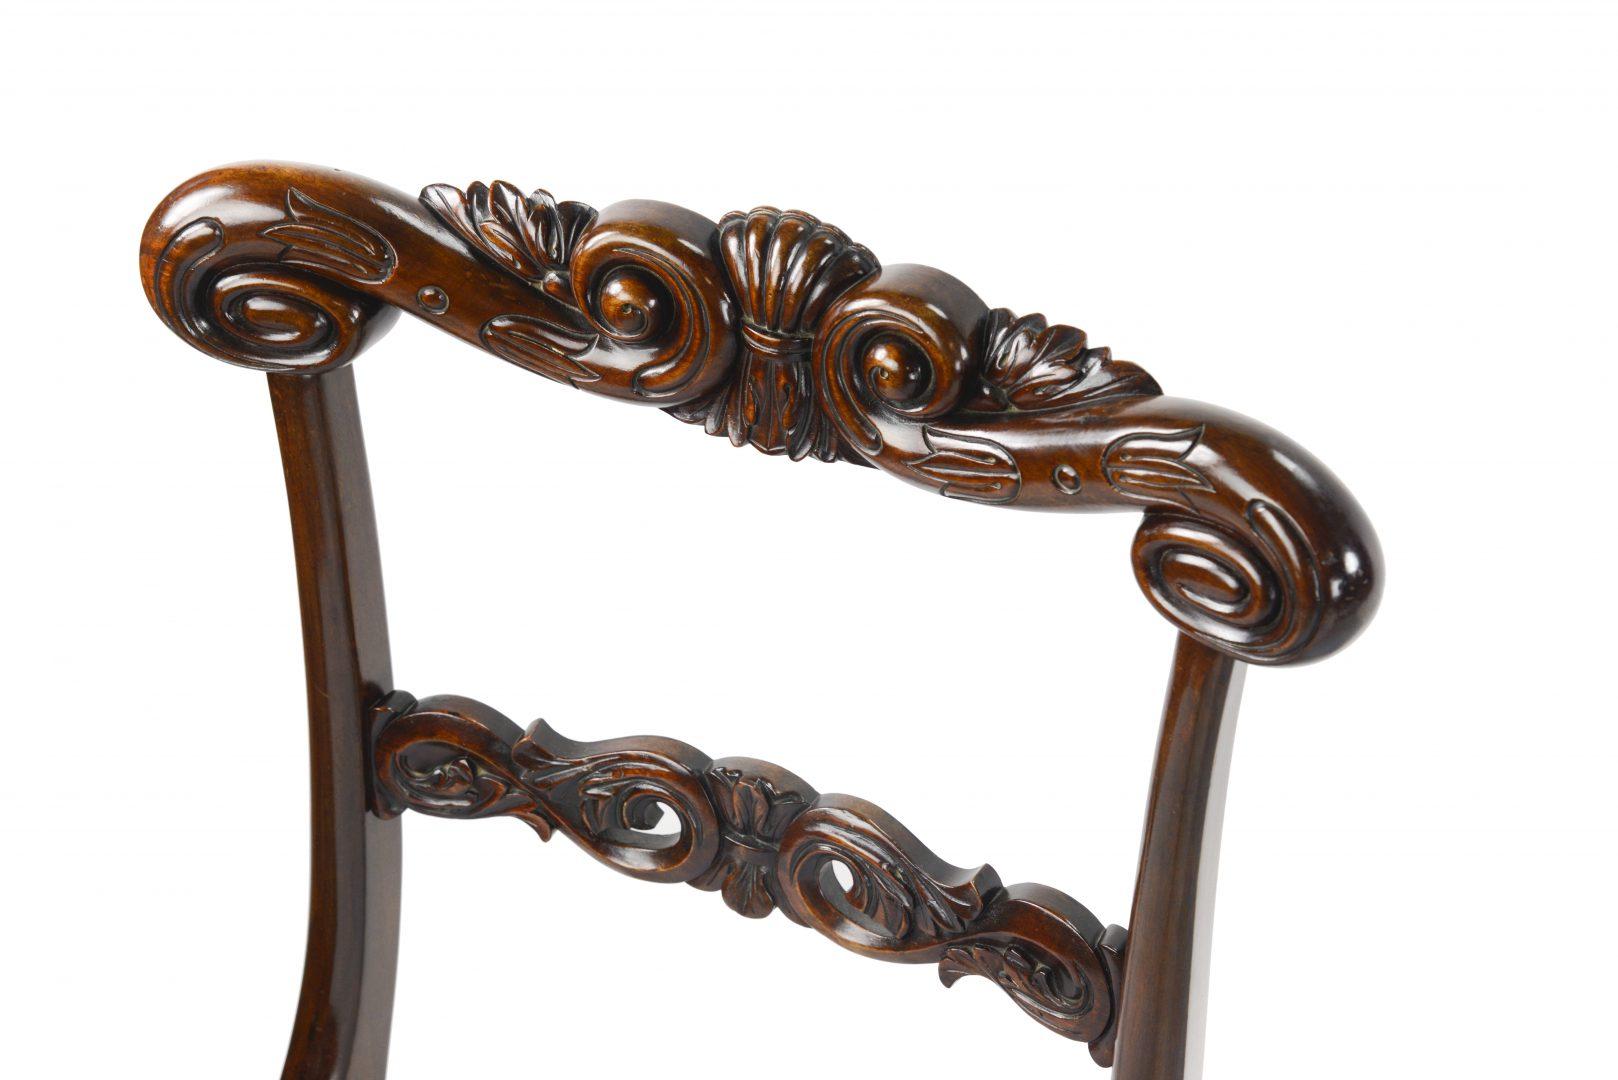 An exceptional set of eleven George IV rosewood dining chairs a set of eight plus three similar, heavily carved back rails, by Gillows of Lancaster. One of the chair rails is stamped on the underside with the word eight, presumably the number of